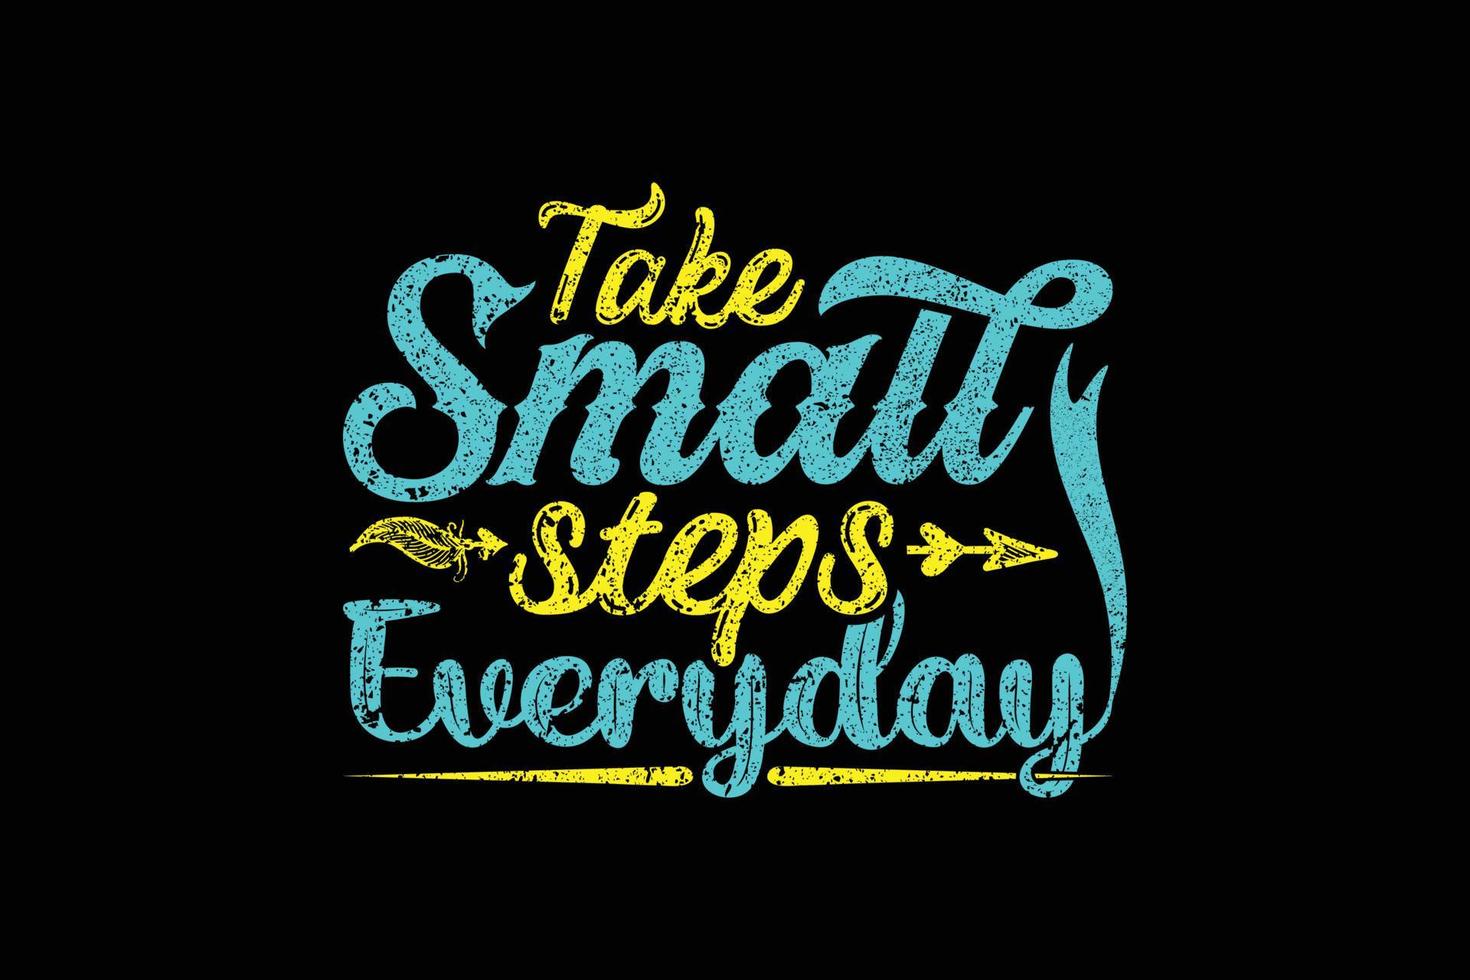 Take small steps everyday typography t shirt design vector